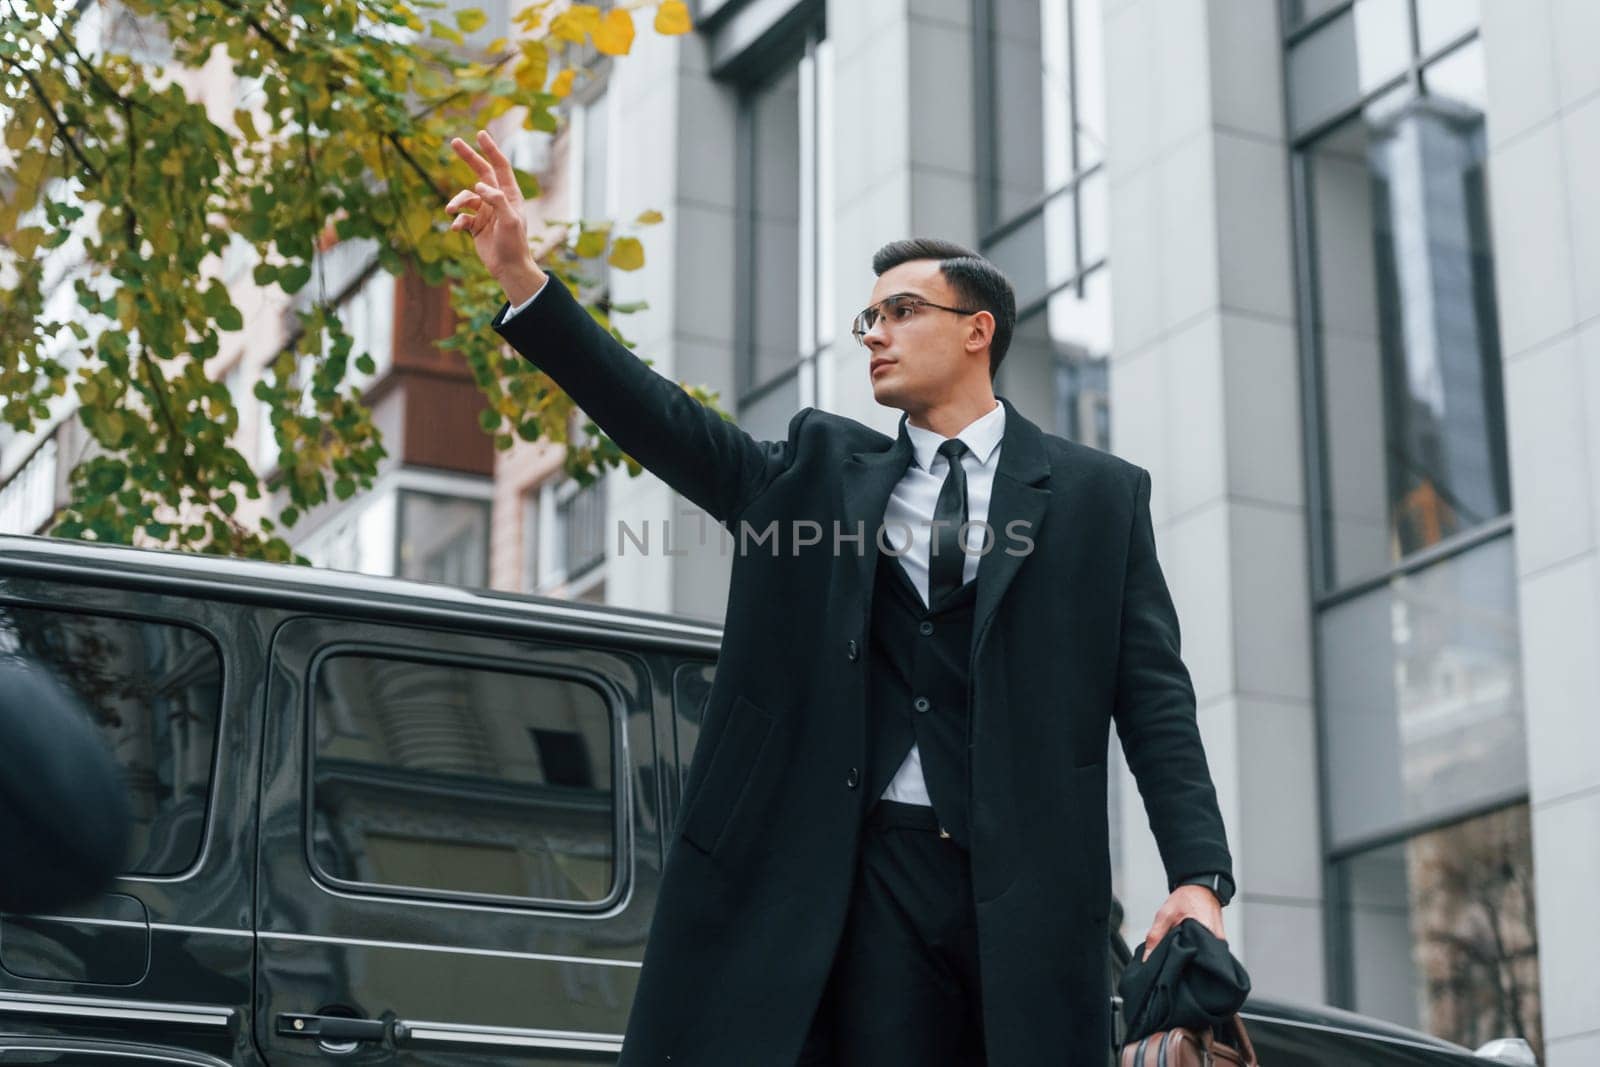 Calling taxi. Businessman in black suit and tie is outdoors in the city by Standret